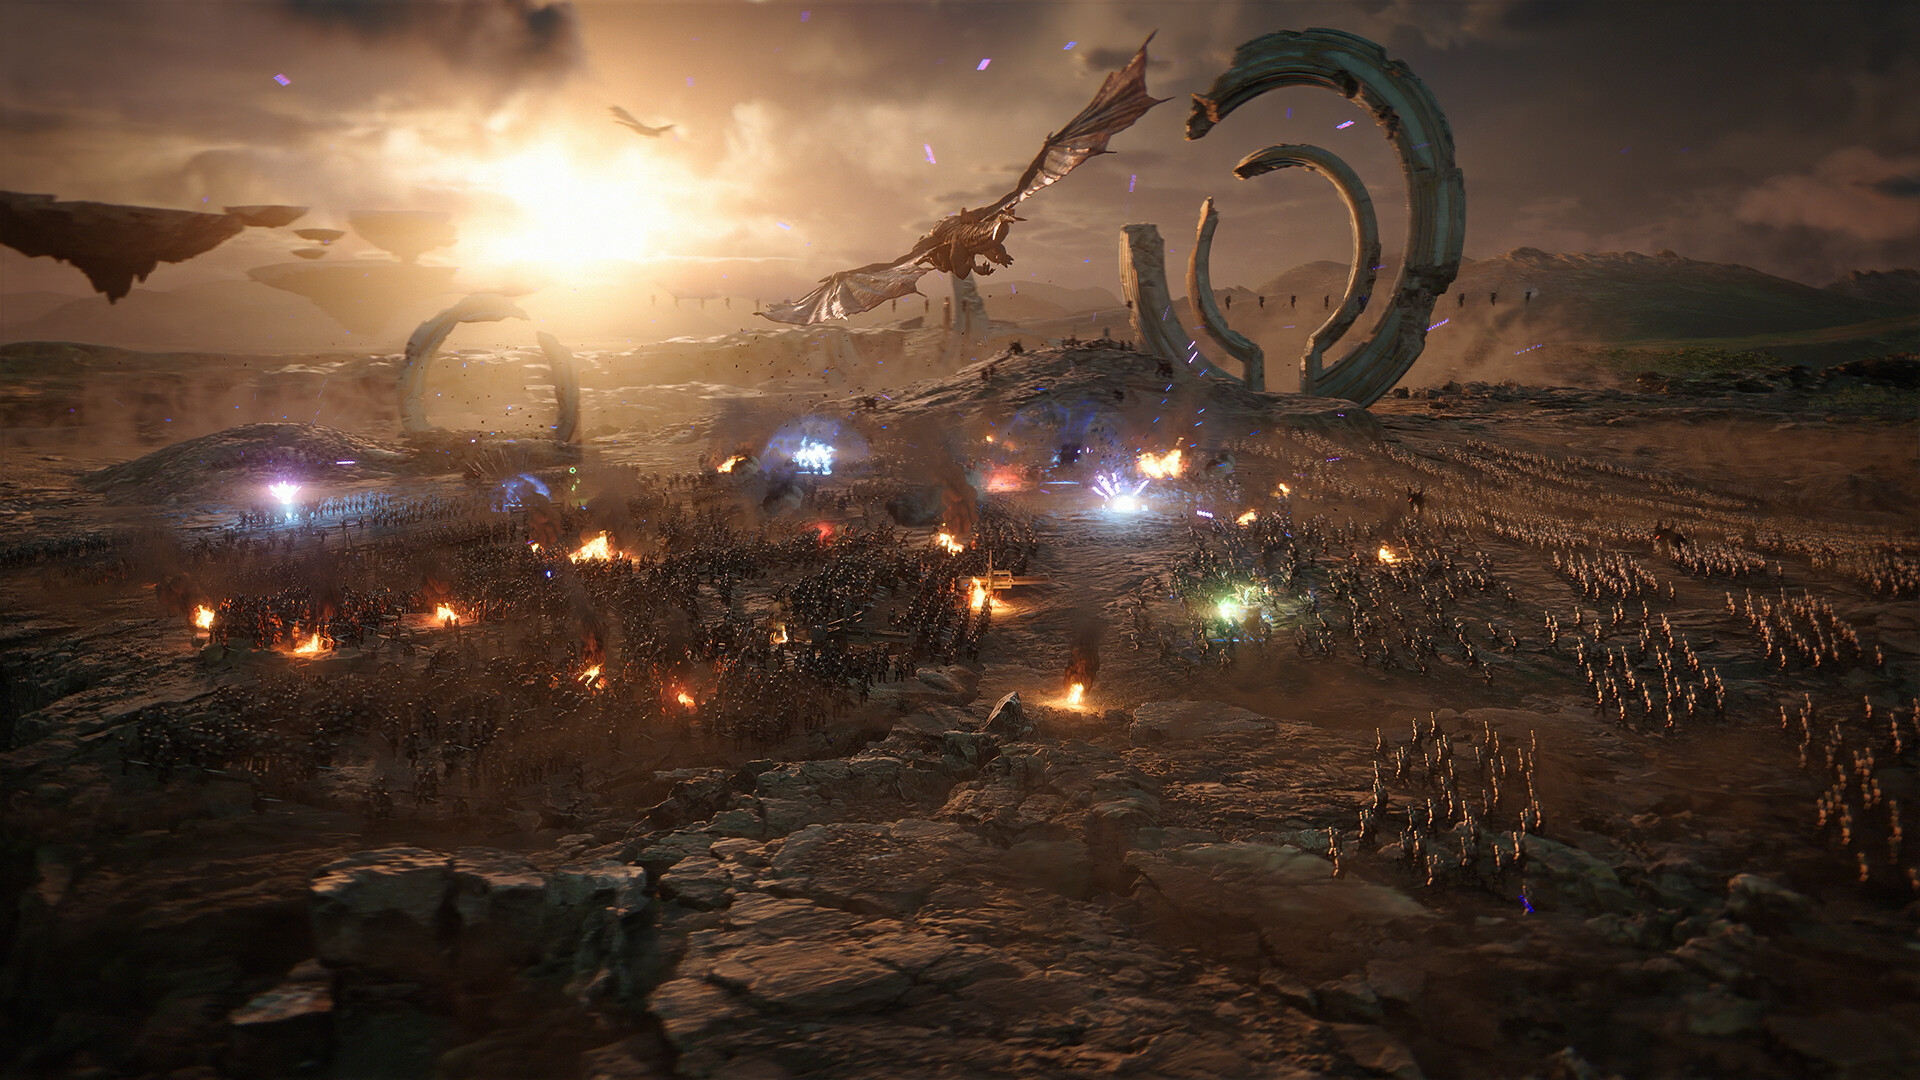 A sci-fi landscape filled with an ensuing battle